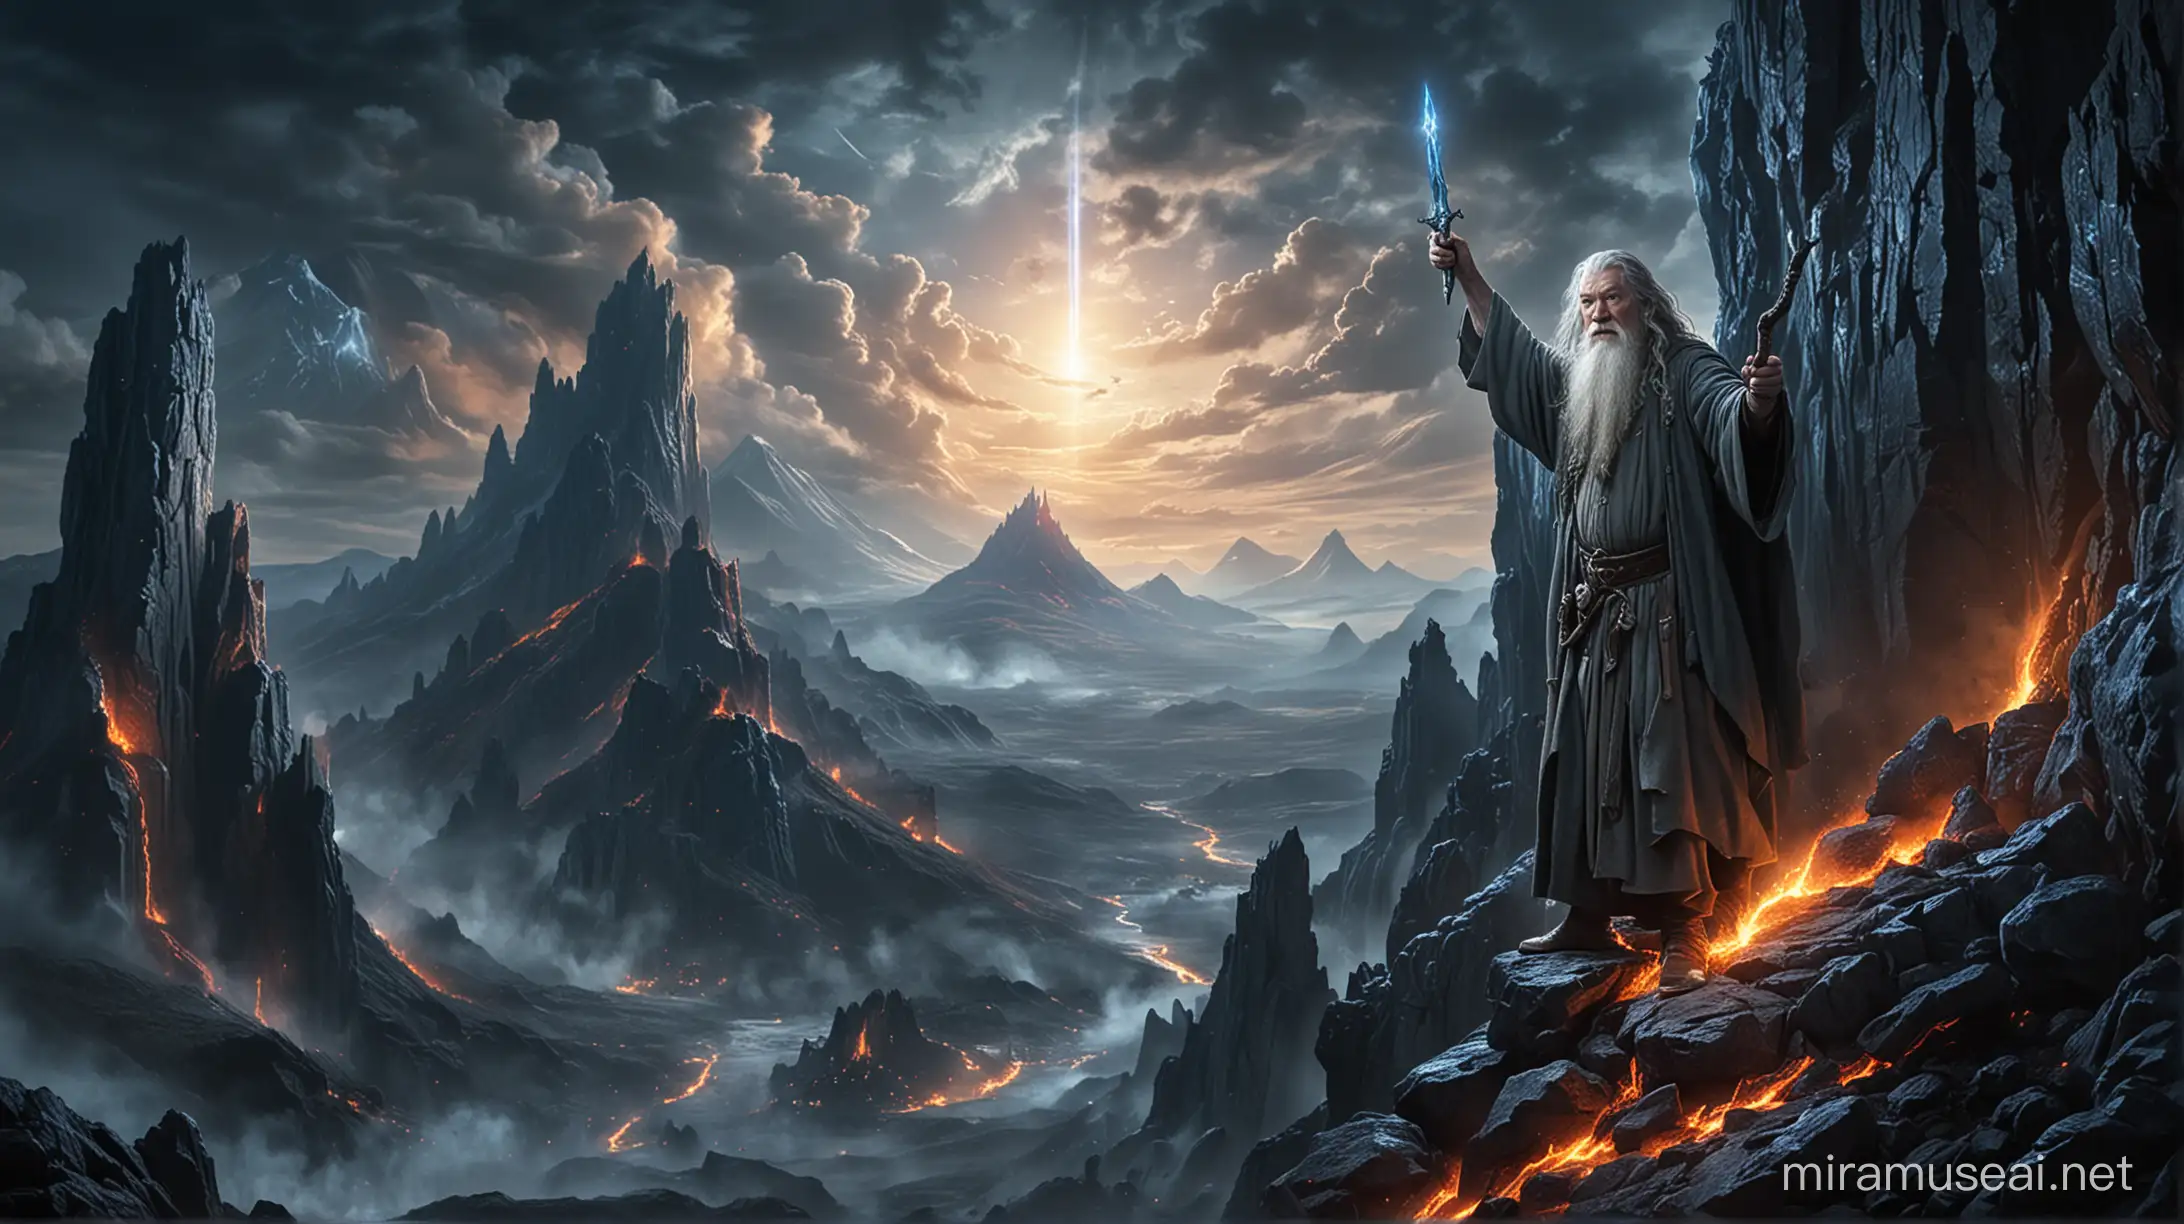 Gandalf the Gray Poses on Cliff Edge Amid Orc Invasion and Volcanic Eruption